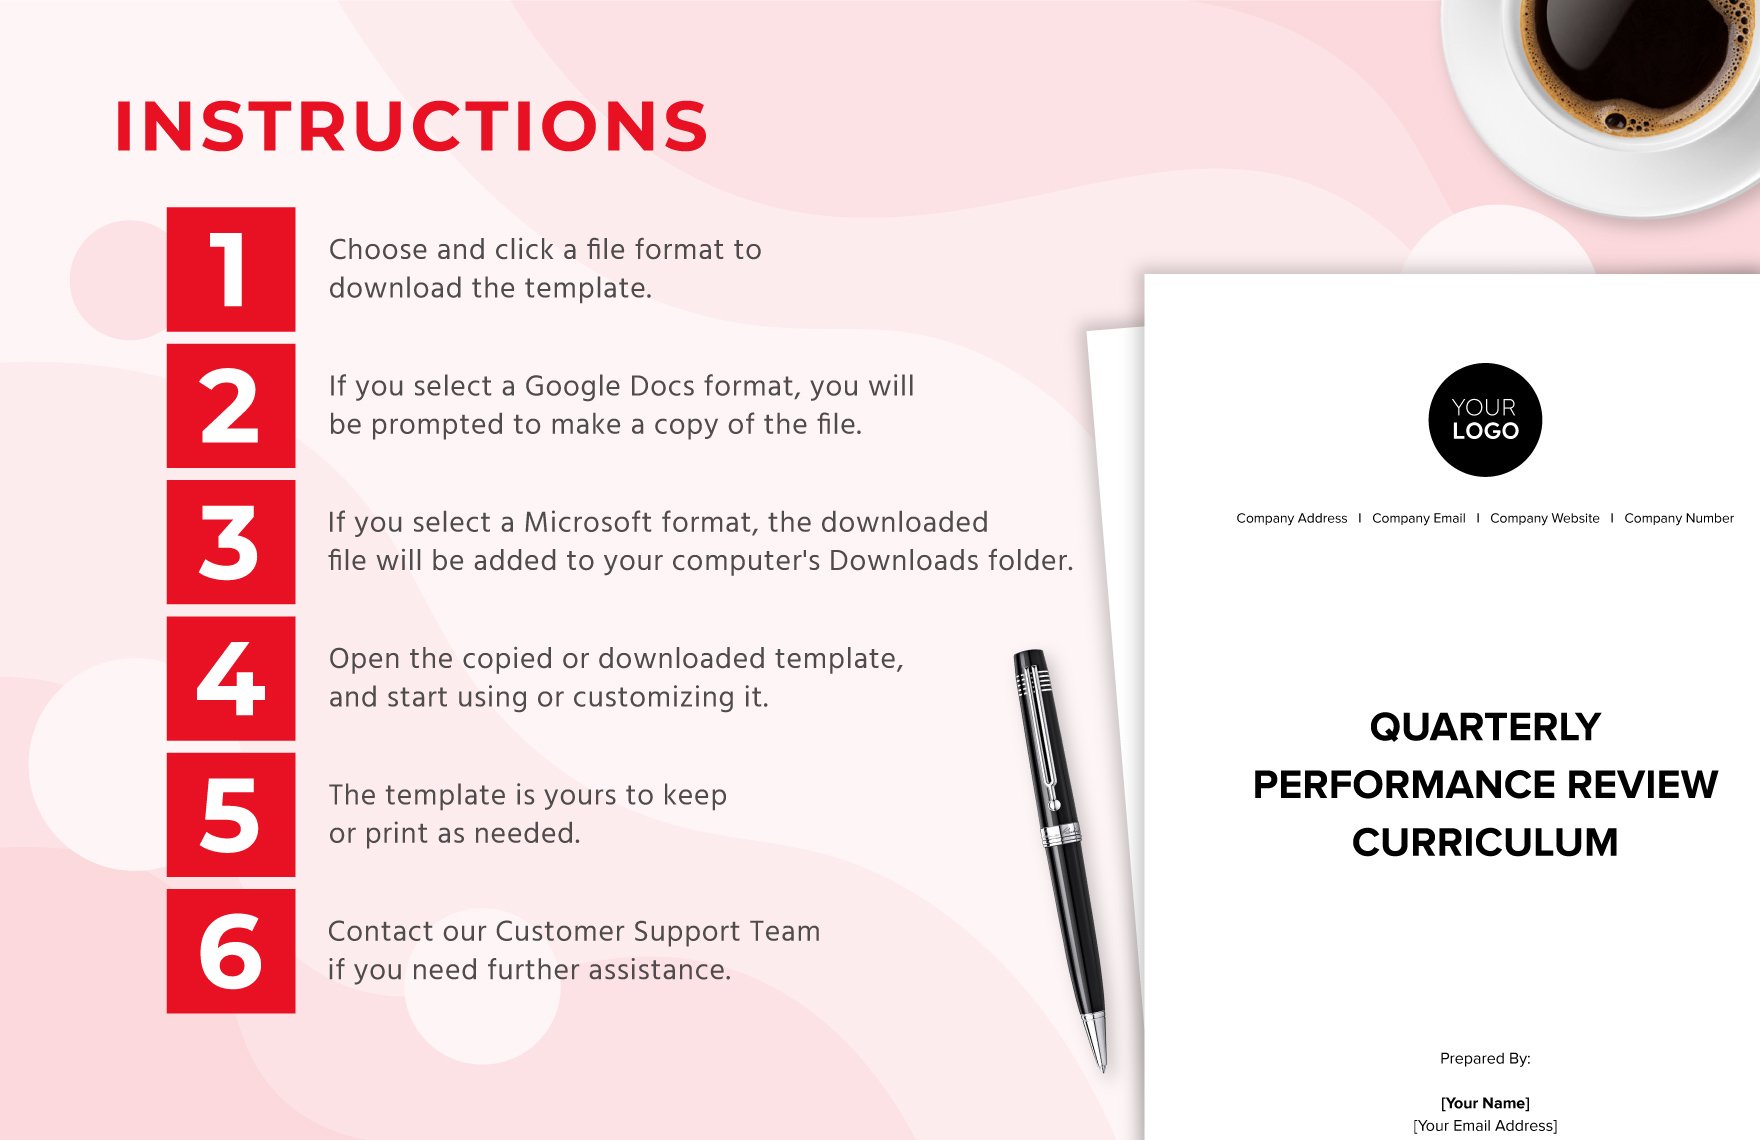 Quarterly Performance Review Curriculum HR Template